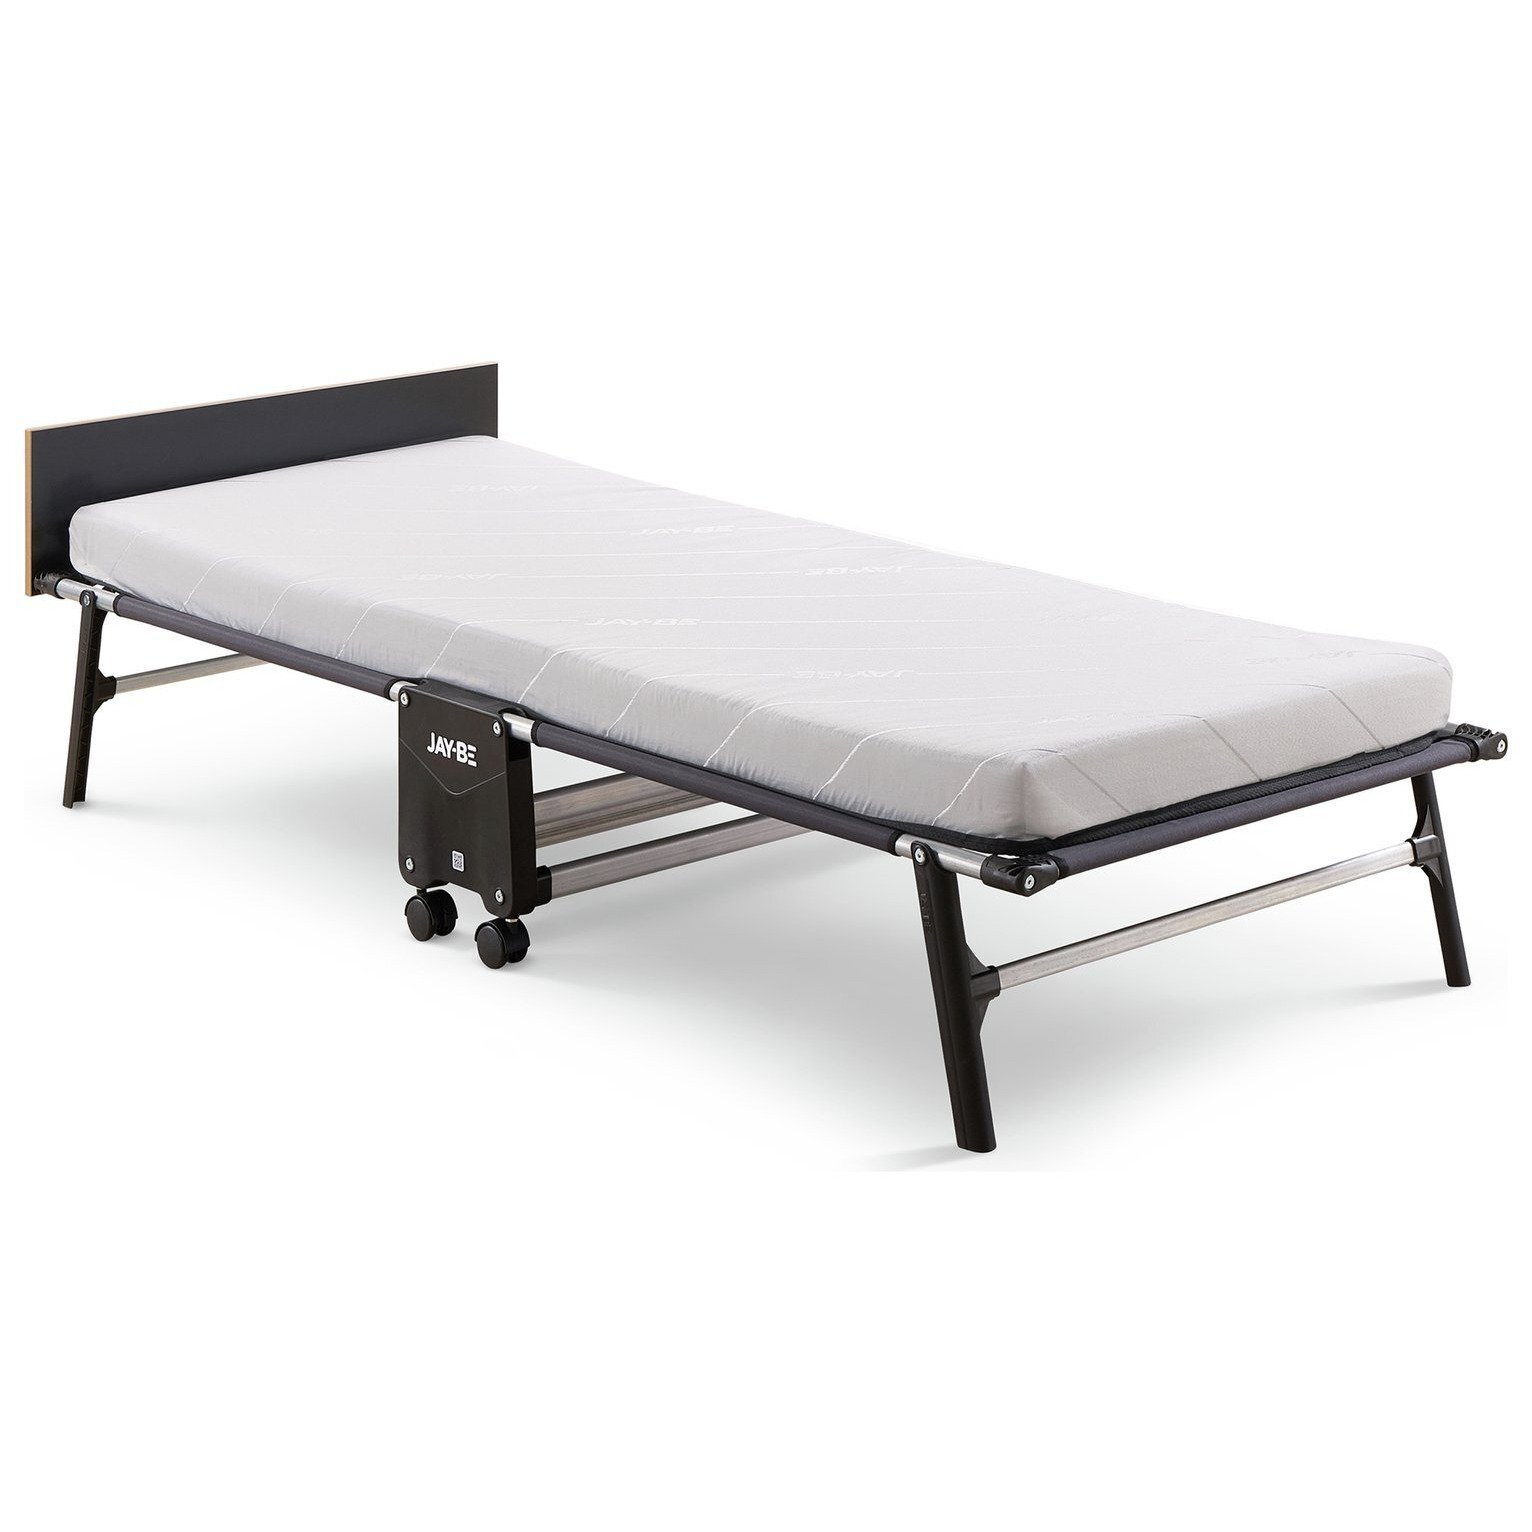 Jay-Be Rollaway Folding Bed with e-Fibre Mattress - Single - image 1